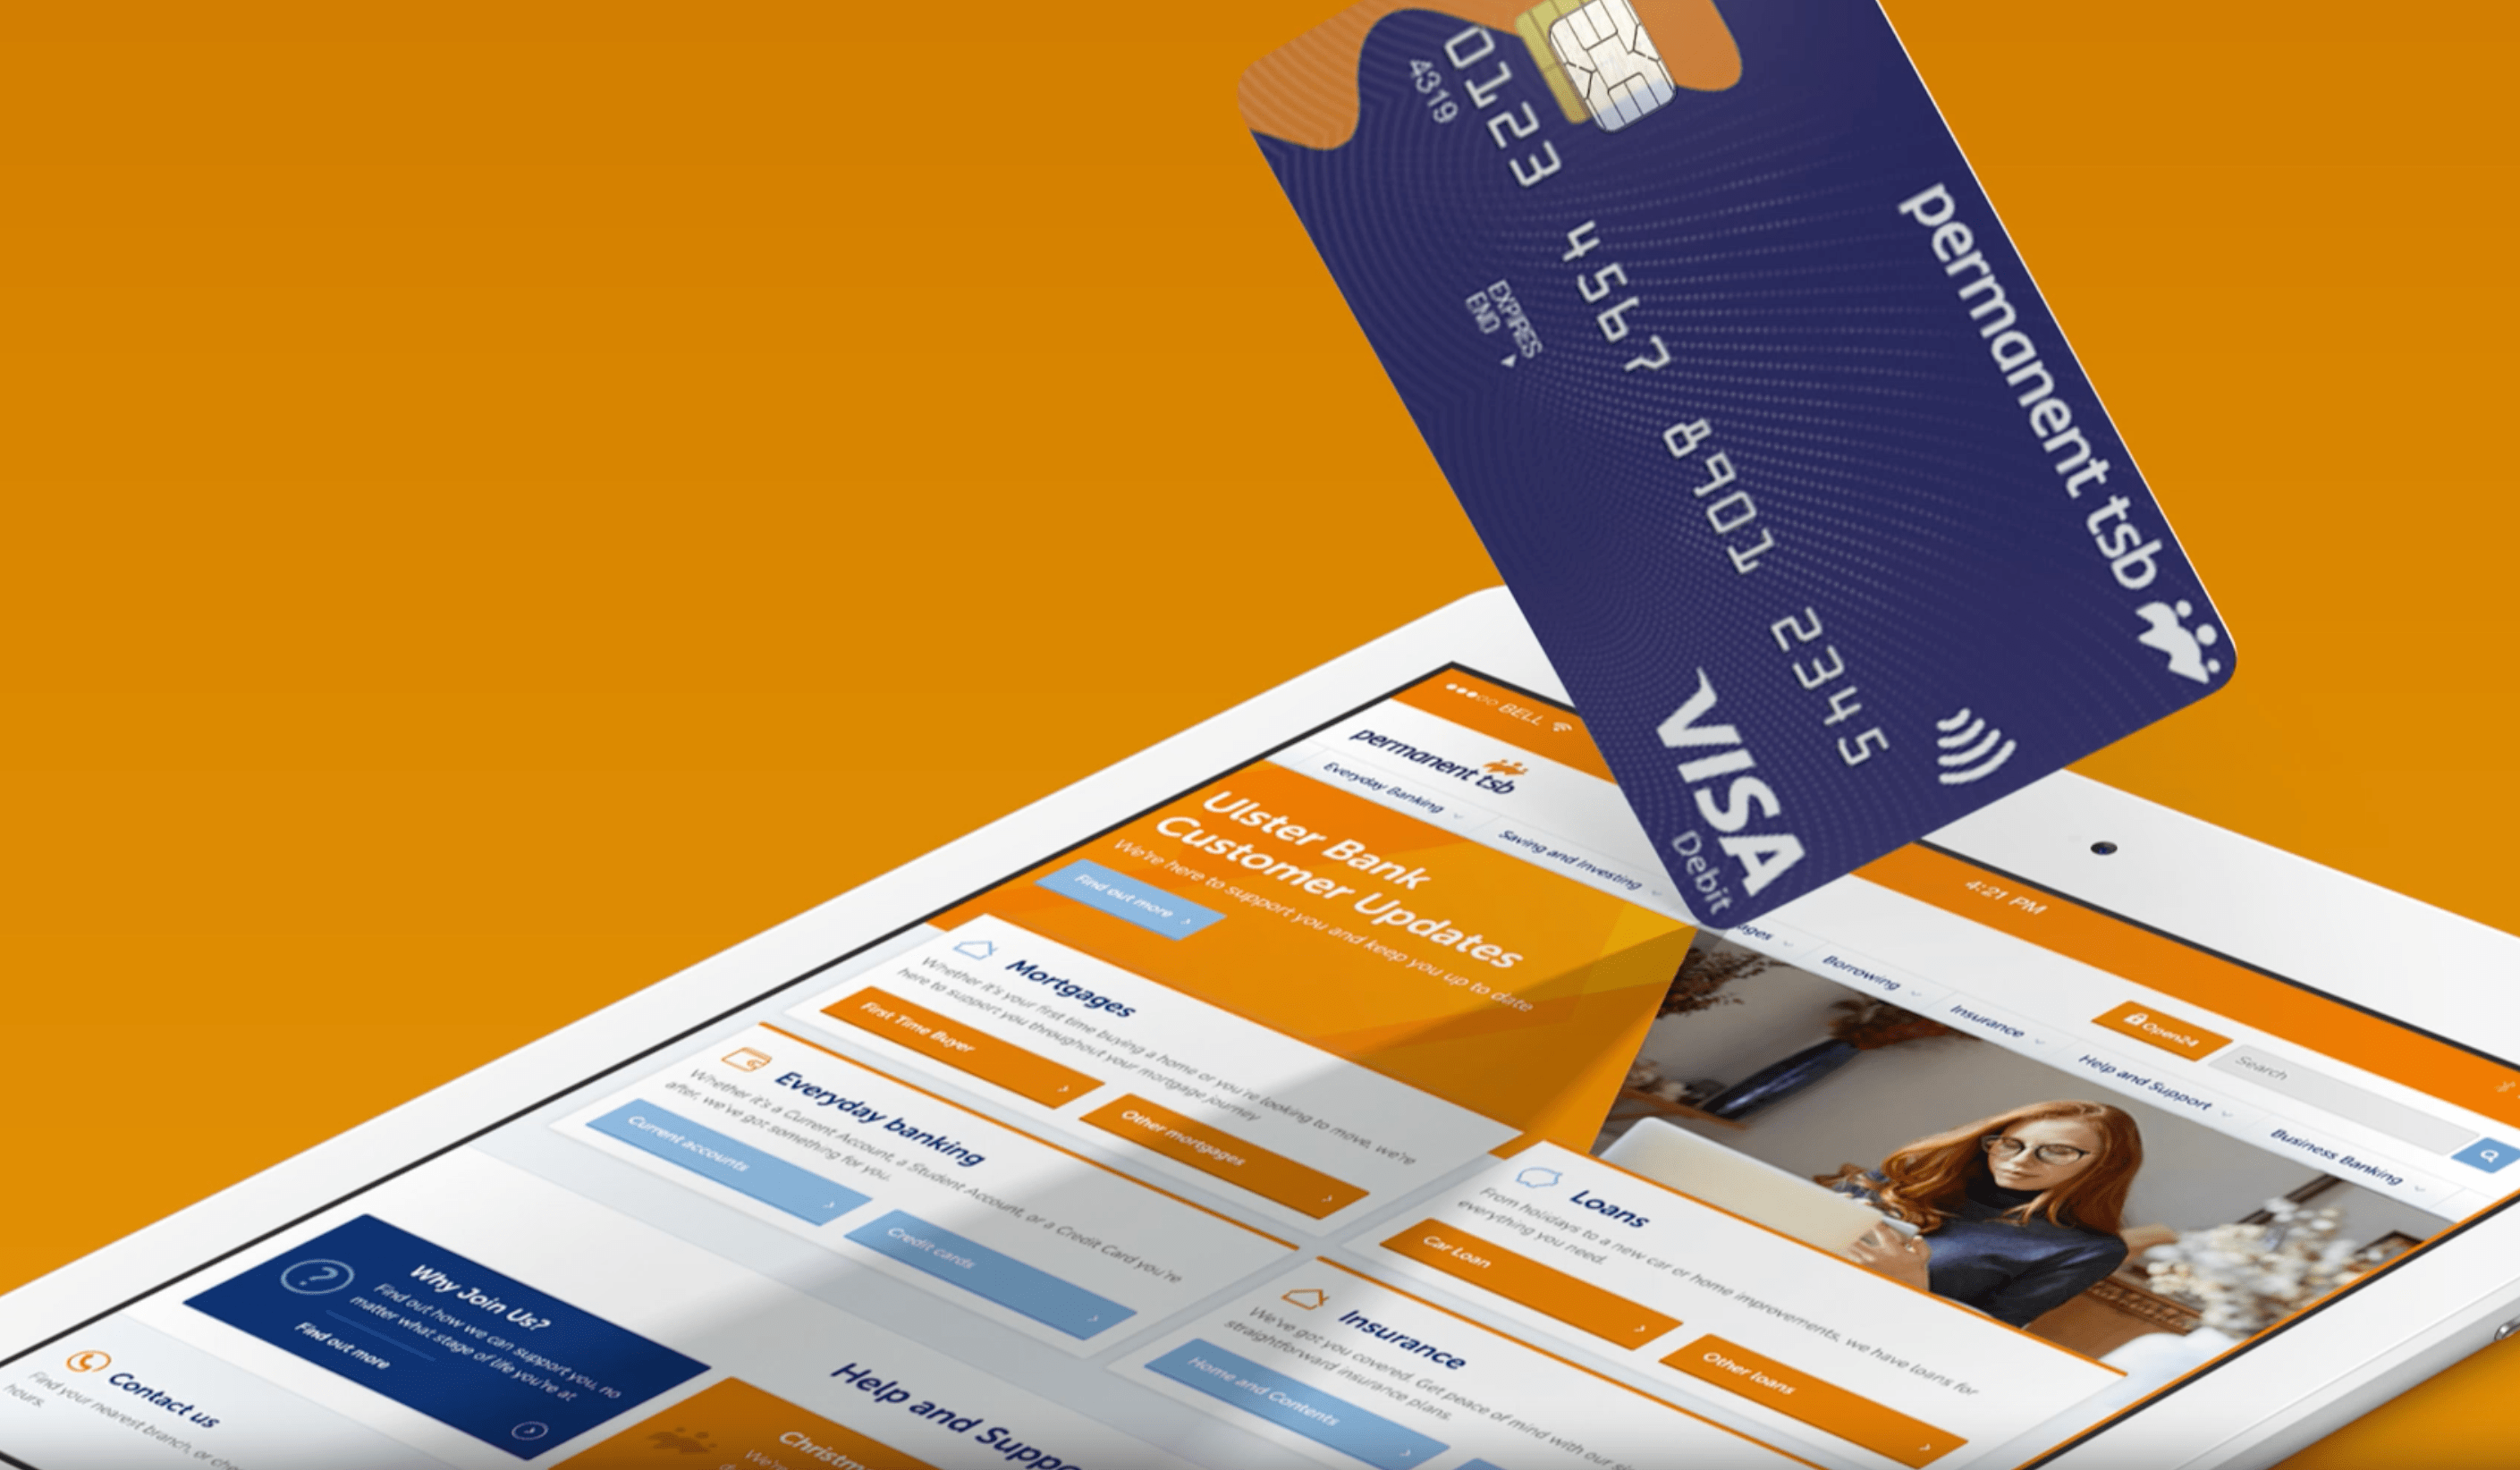 PTSB debit card infront of an iPad with the website.